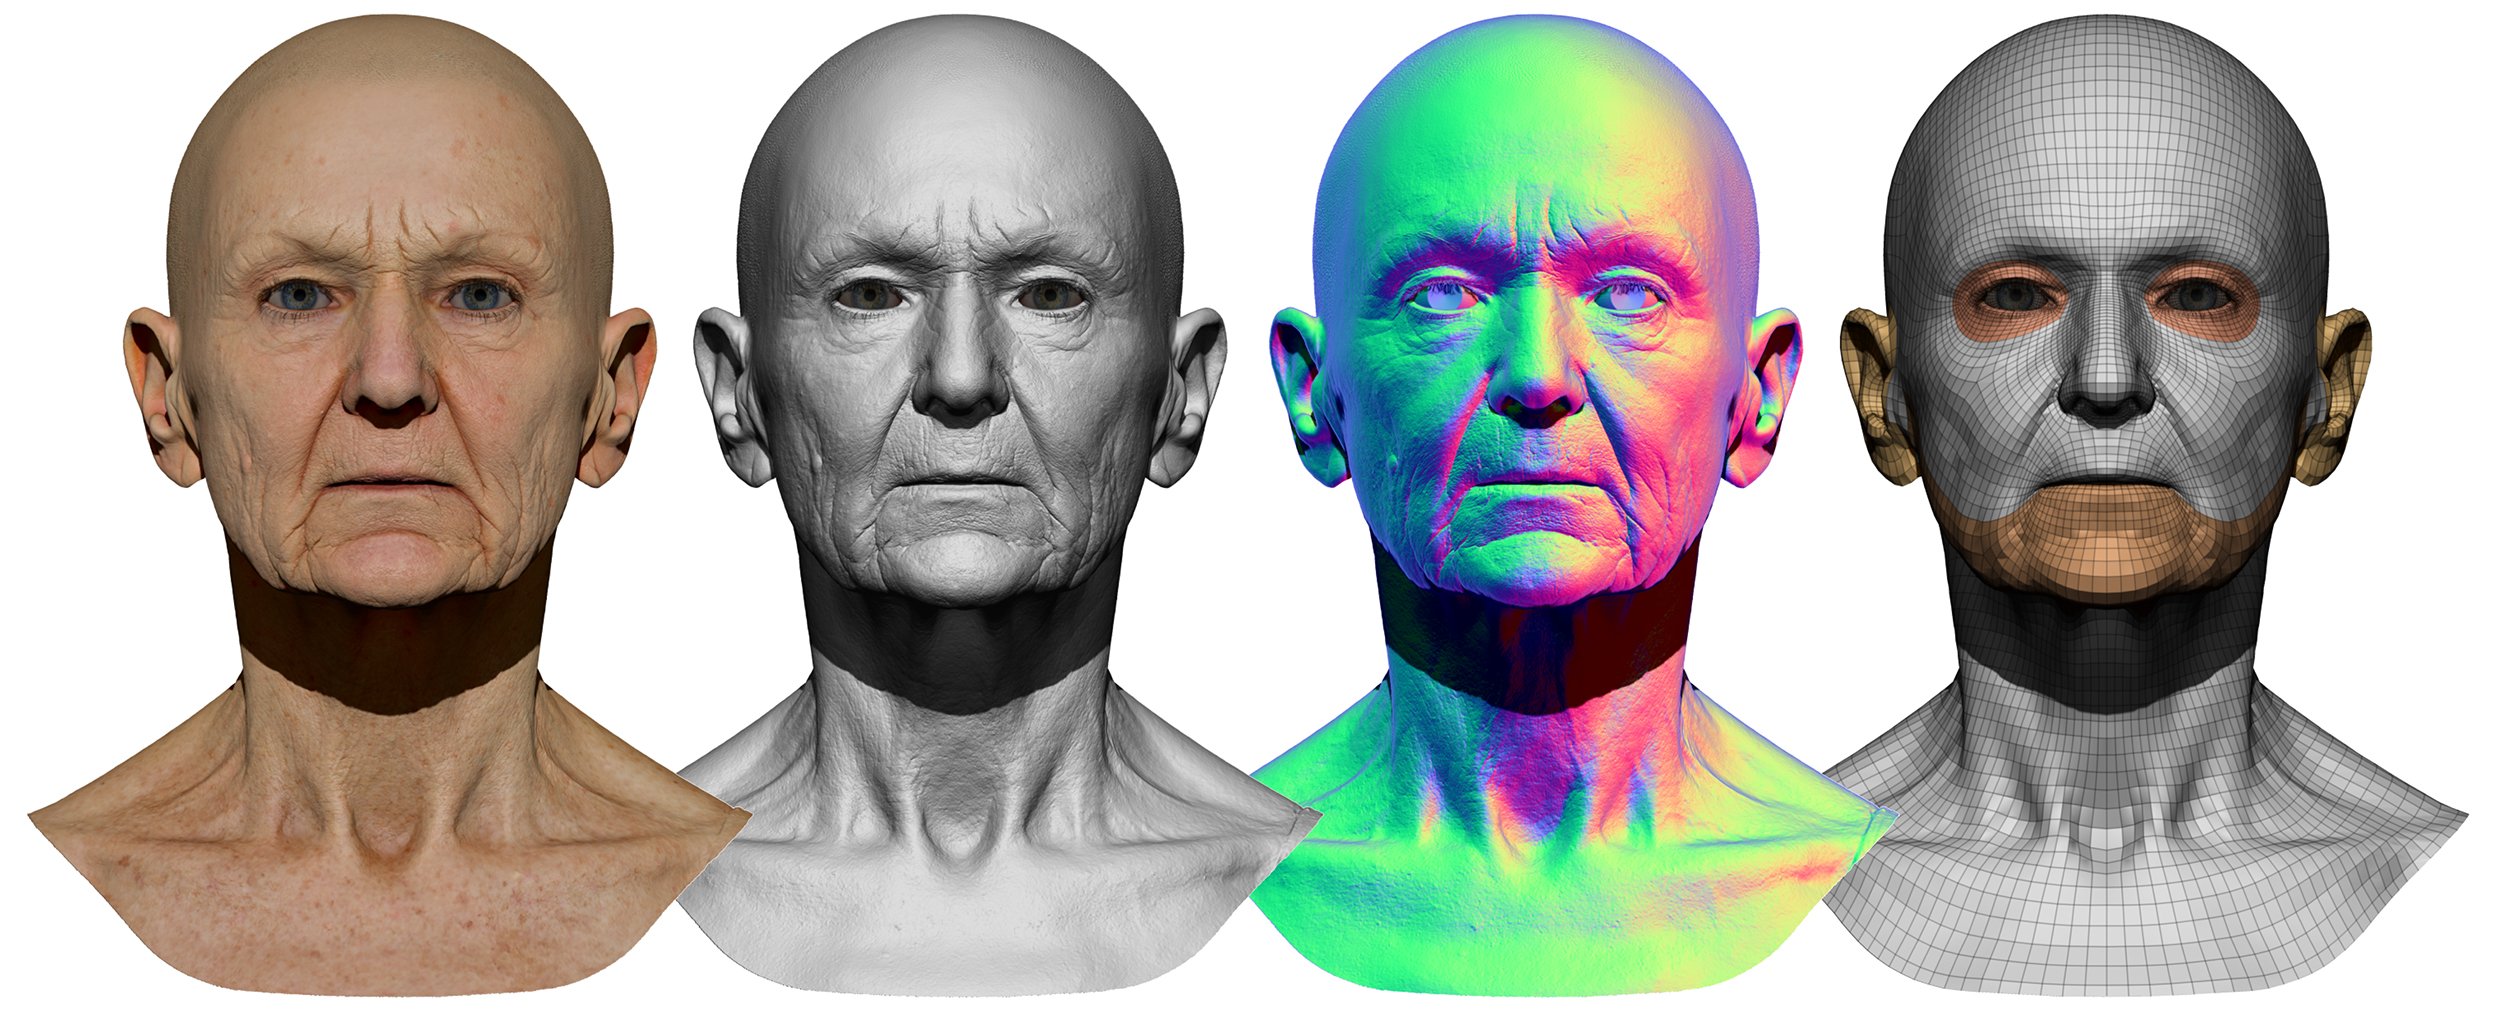 Download Zbrush head model 3D